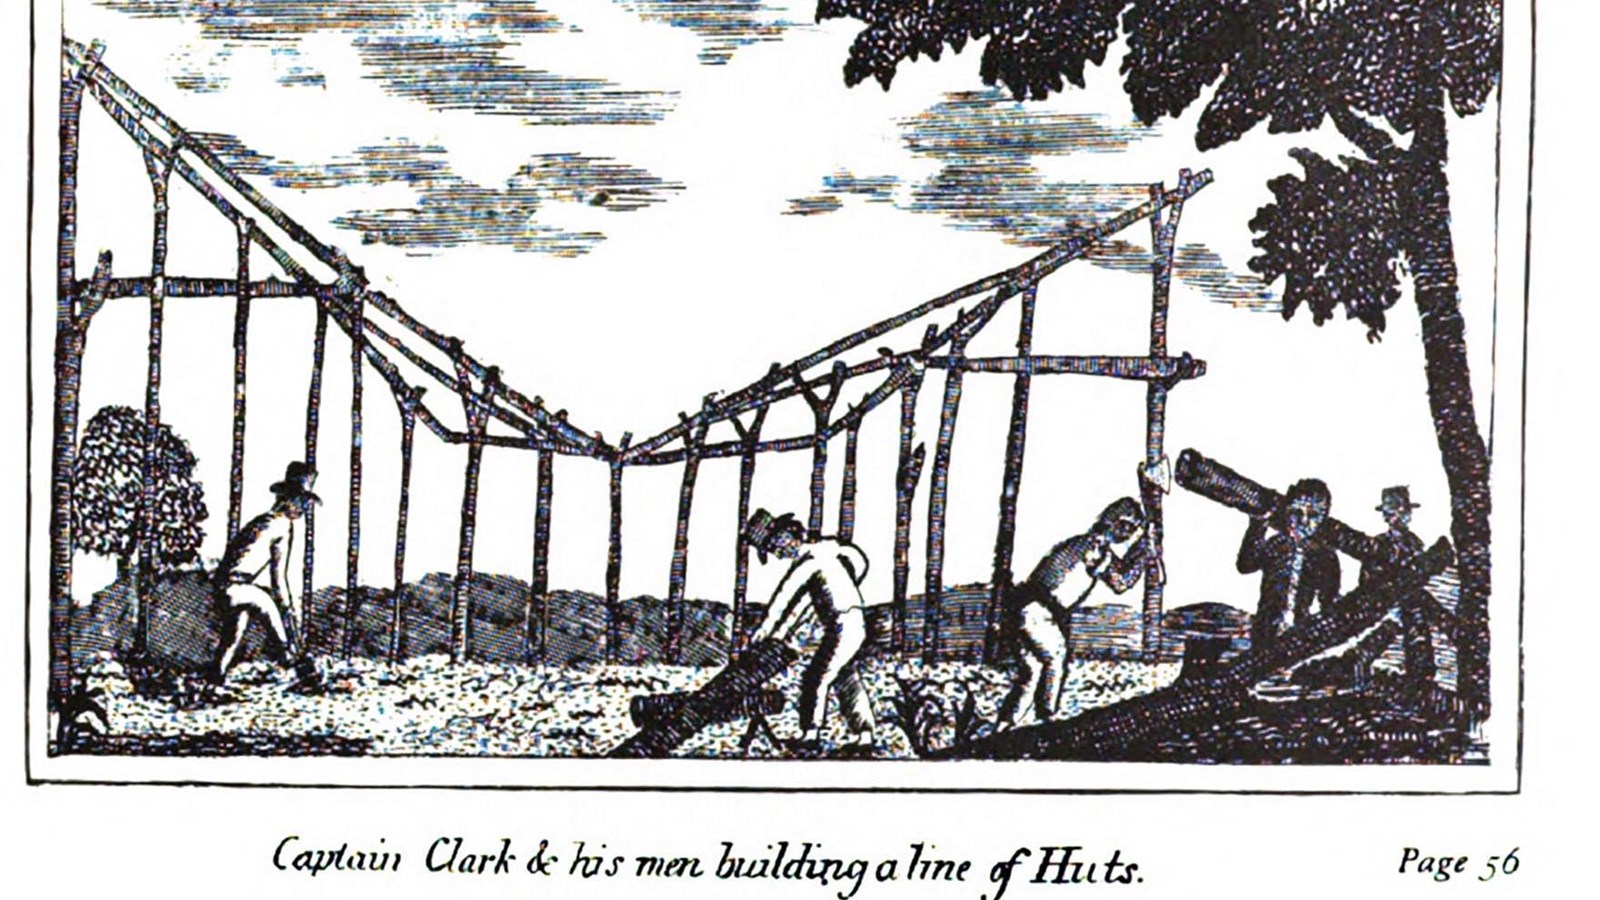 Drawing of men erecting wooden planks to build some sort of structure. 